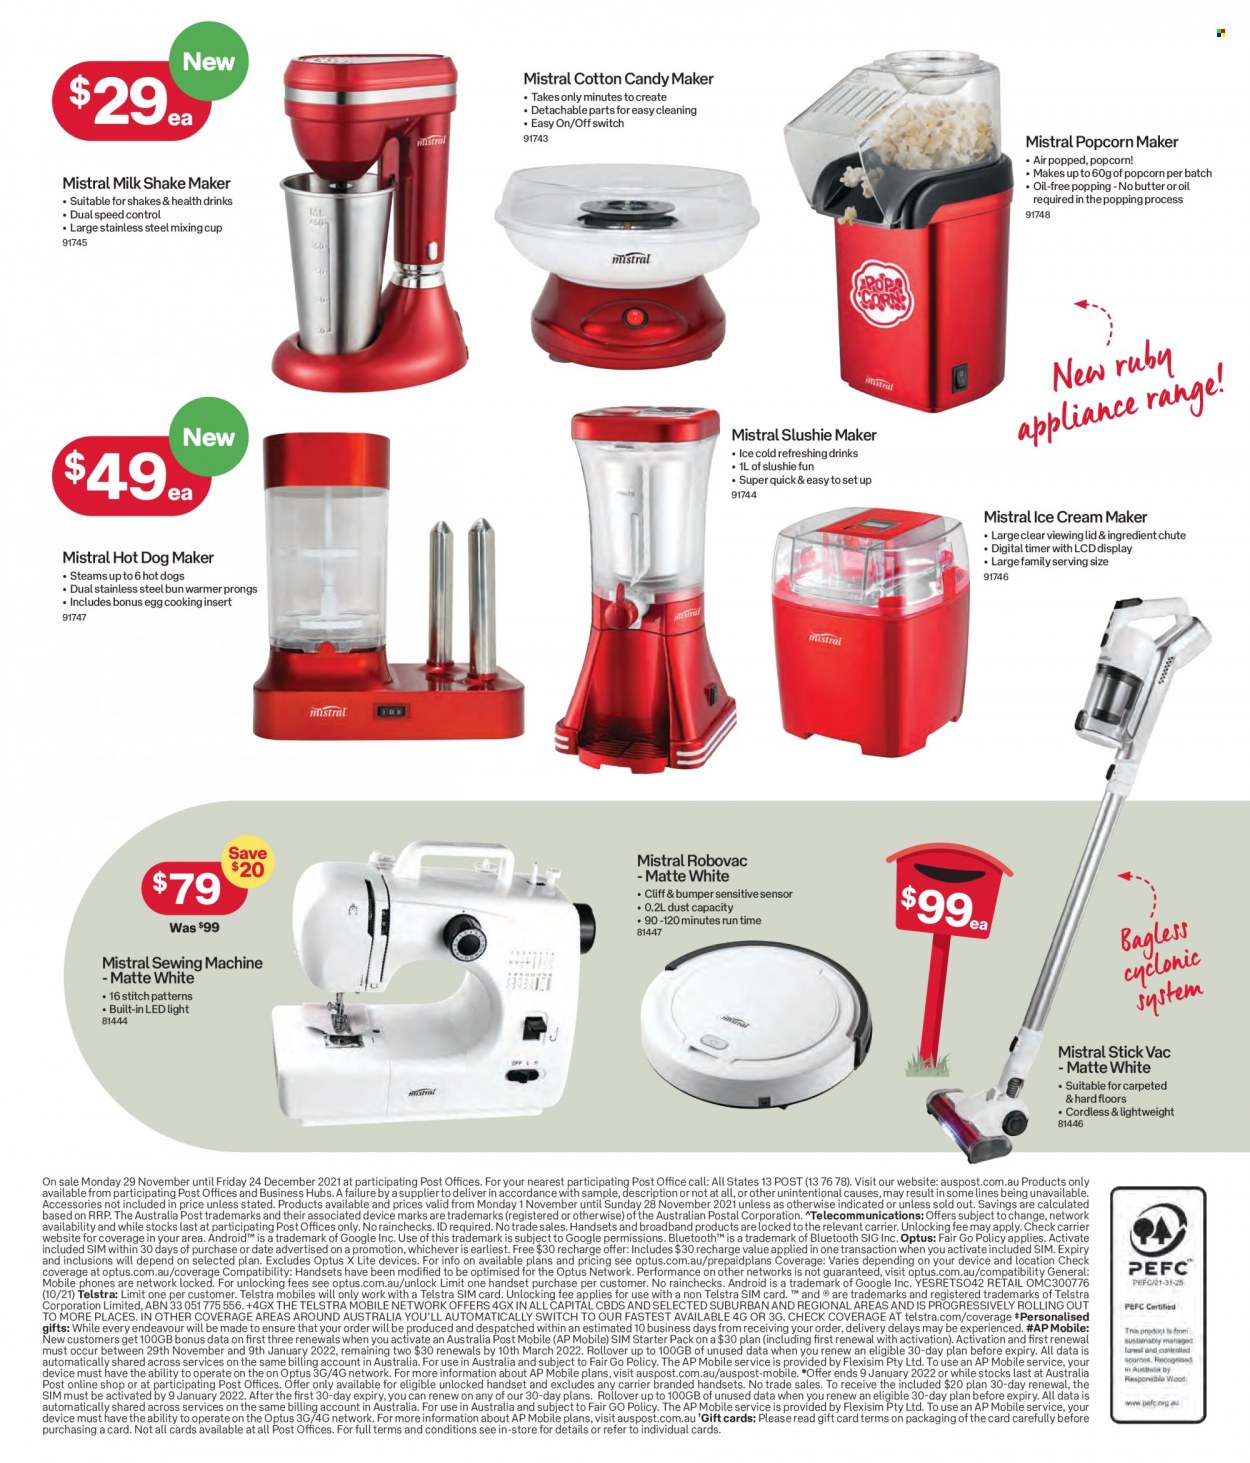 thumbnail - Australia Post Catalogue - 29 Nov 2021 - 24 Dec 2021 - Sales products - lid, cup, Optus, SIM card, sewing machine, ice cream machine, LED light. Page 13.